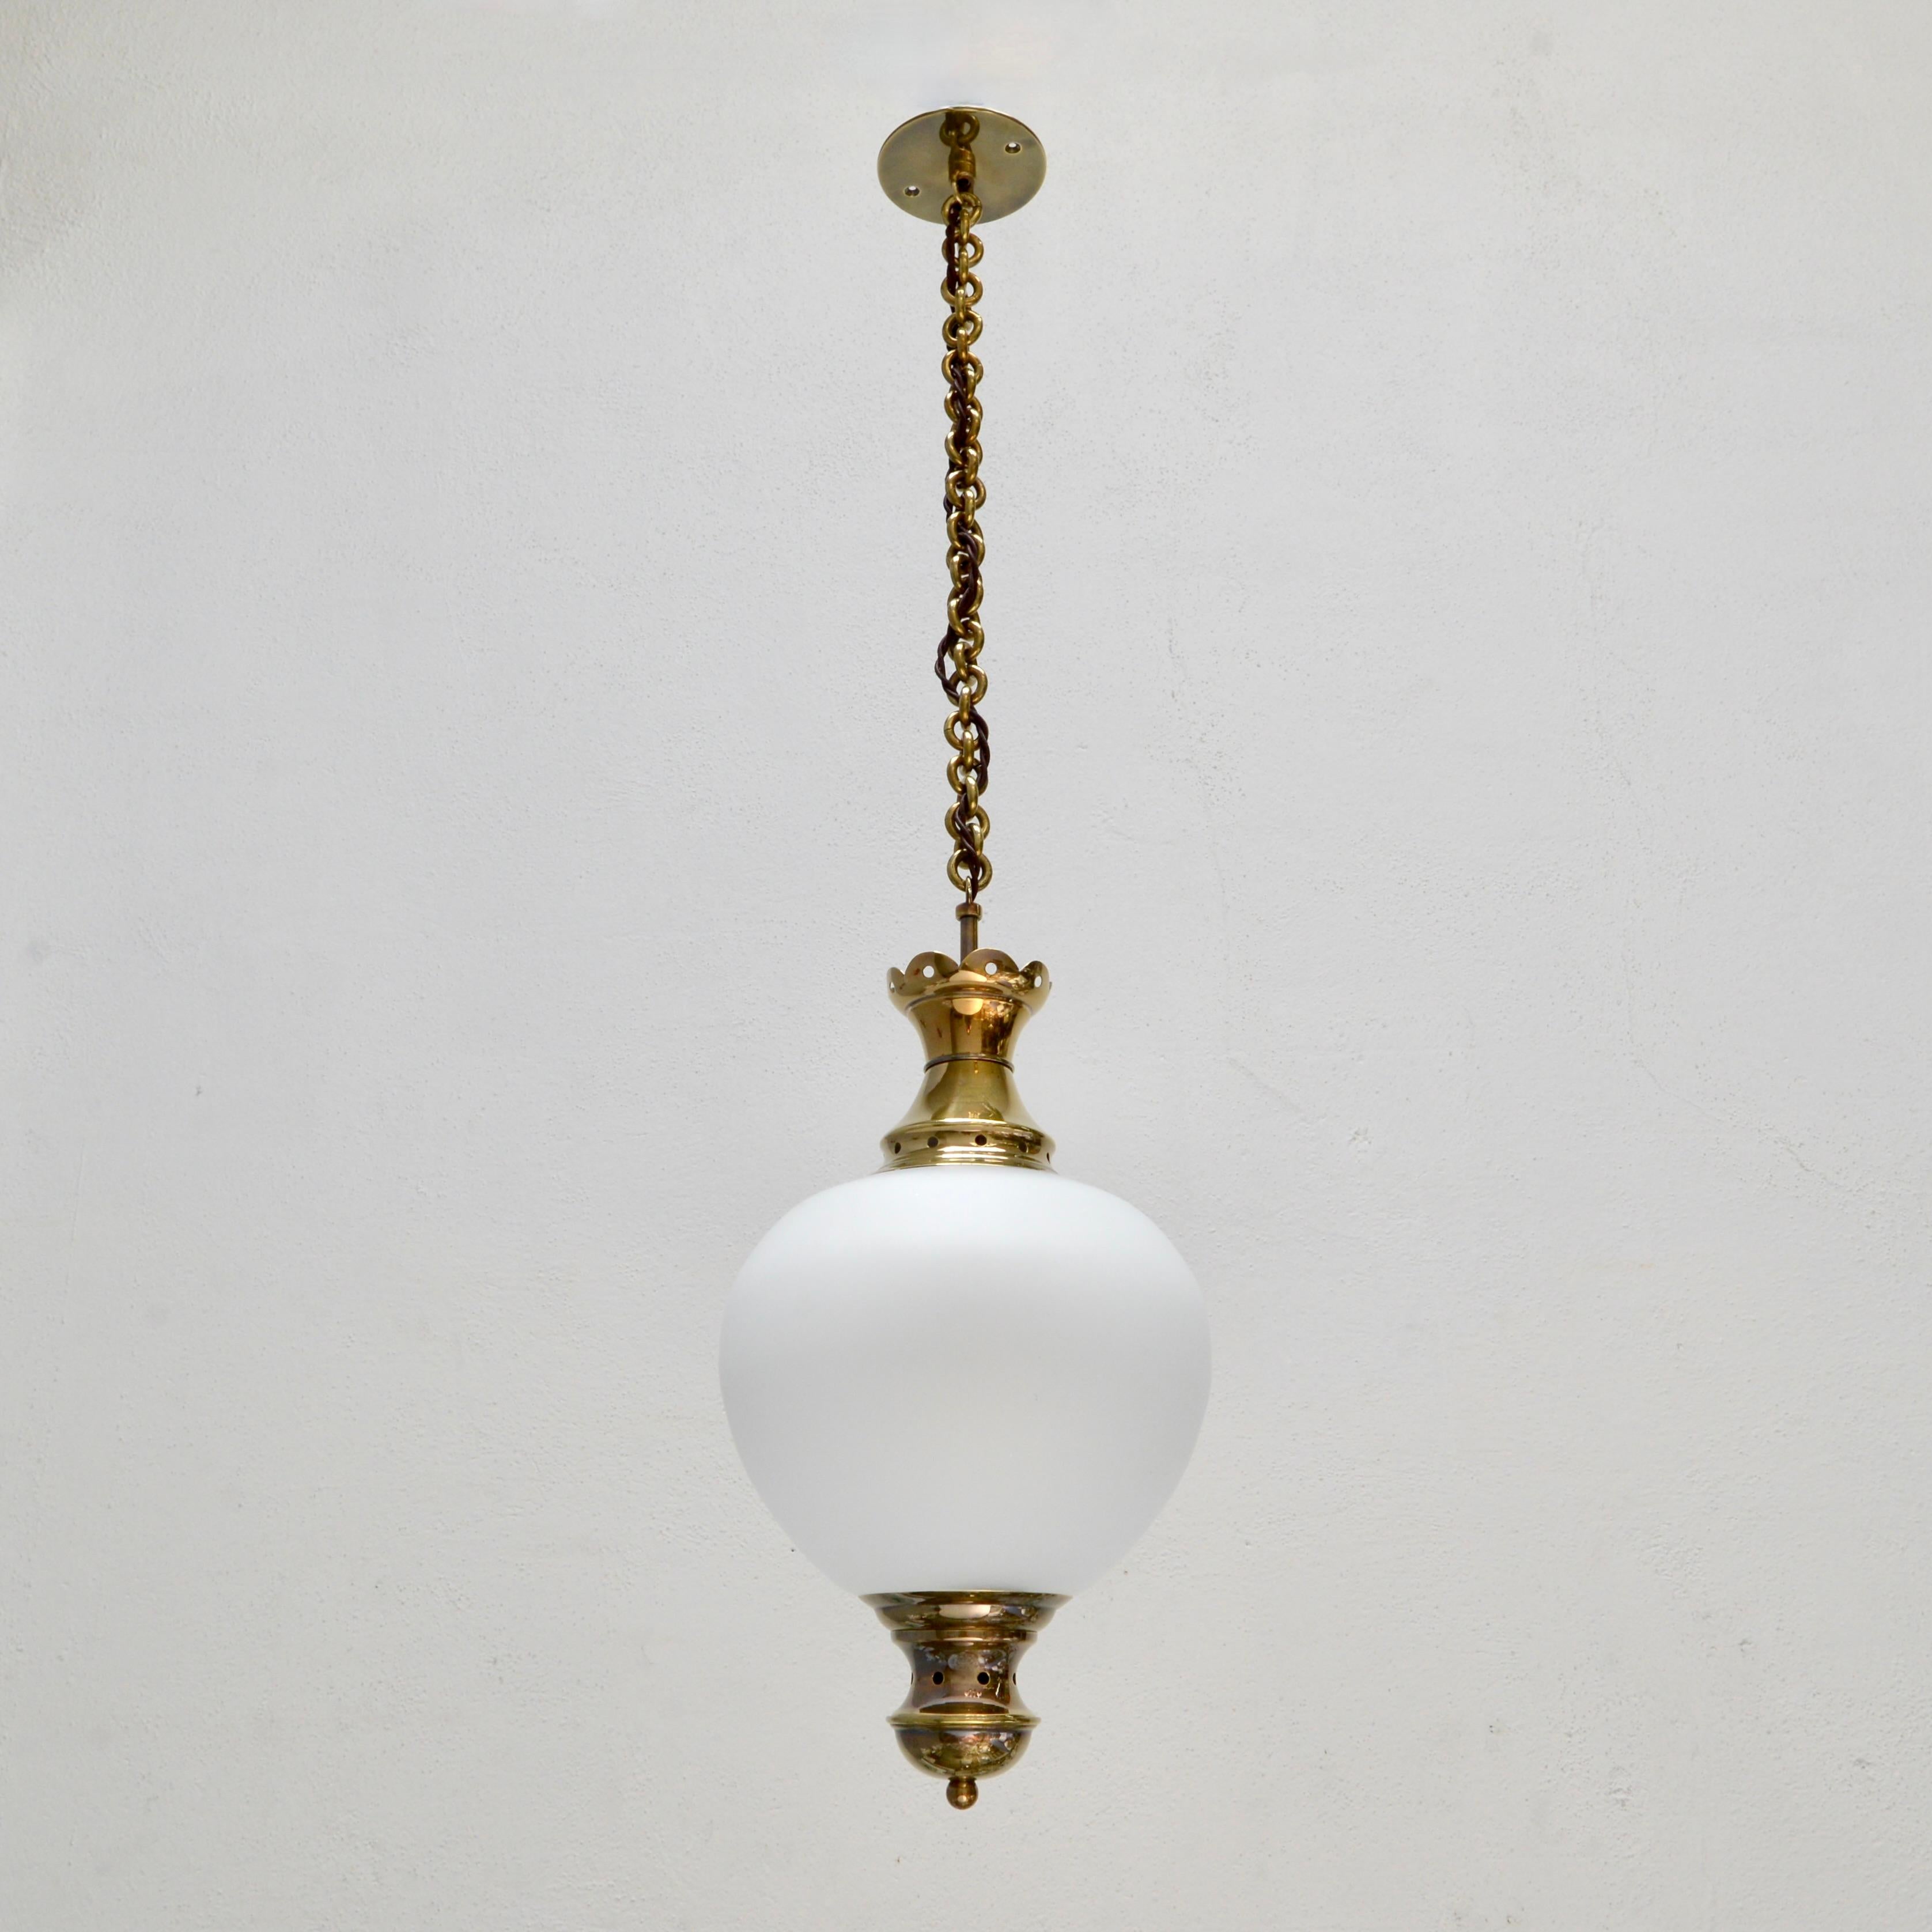 Elegant 1950s pair of pendants from Luigi Caccia Dominioni for Azucena of Italy. Naturally aged un-lacquered brass, restored, solid brass chain. Wired with 1-E26 medium based socket for use in the US. Light bulbs included with order.